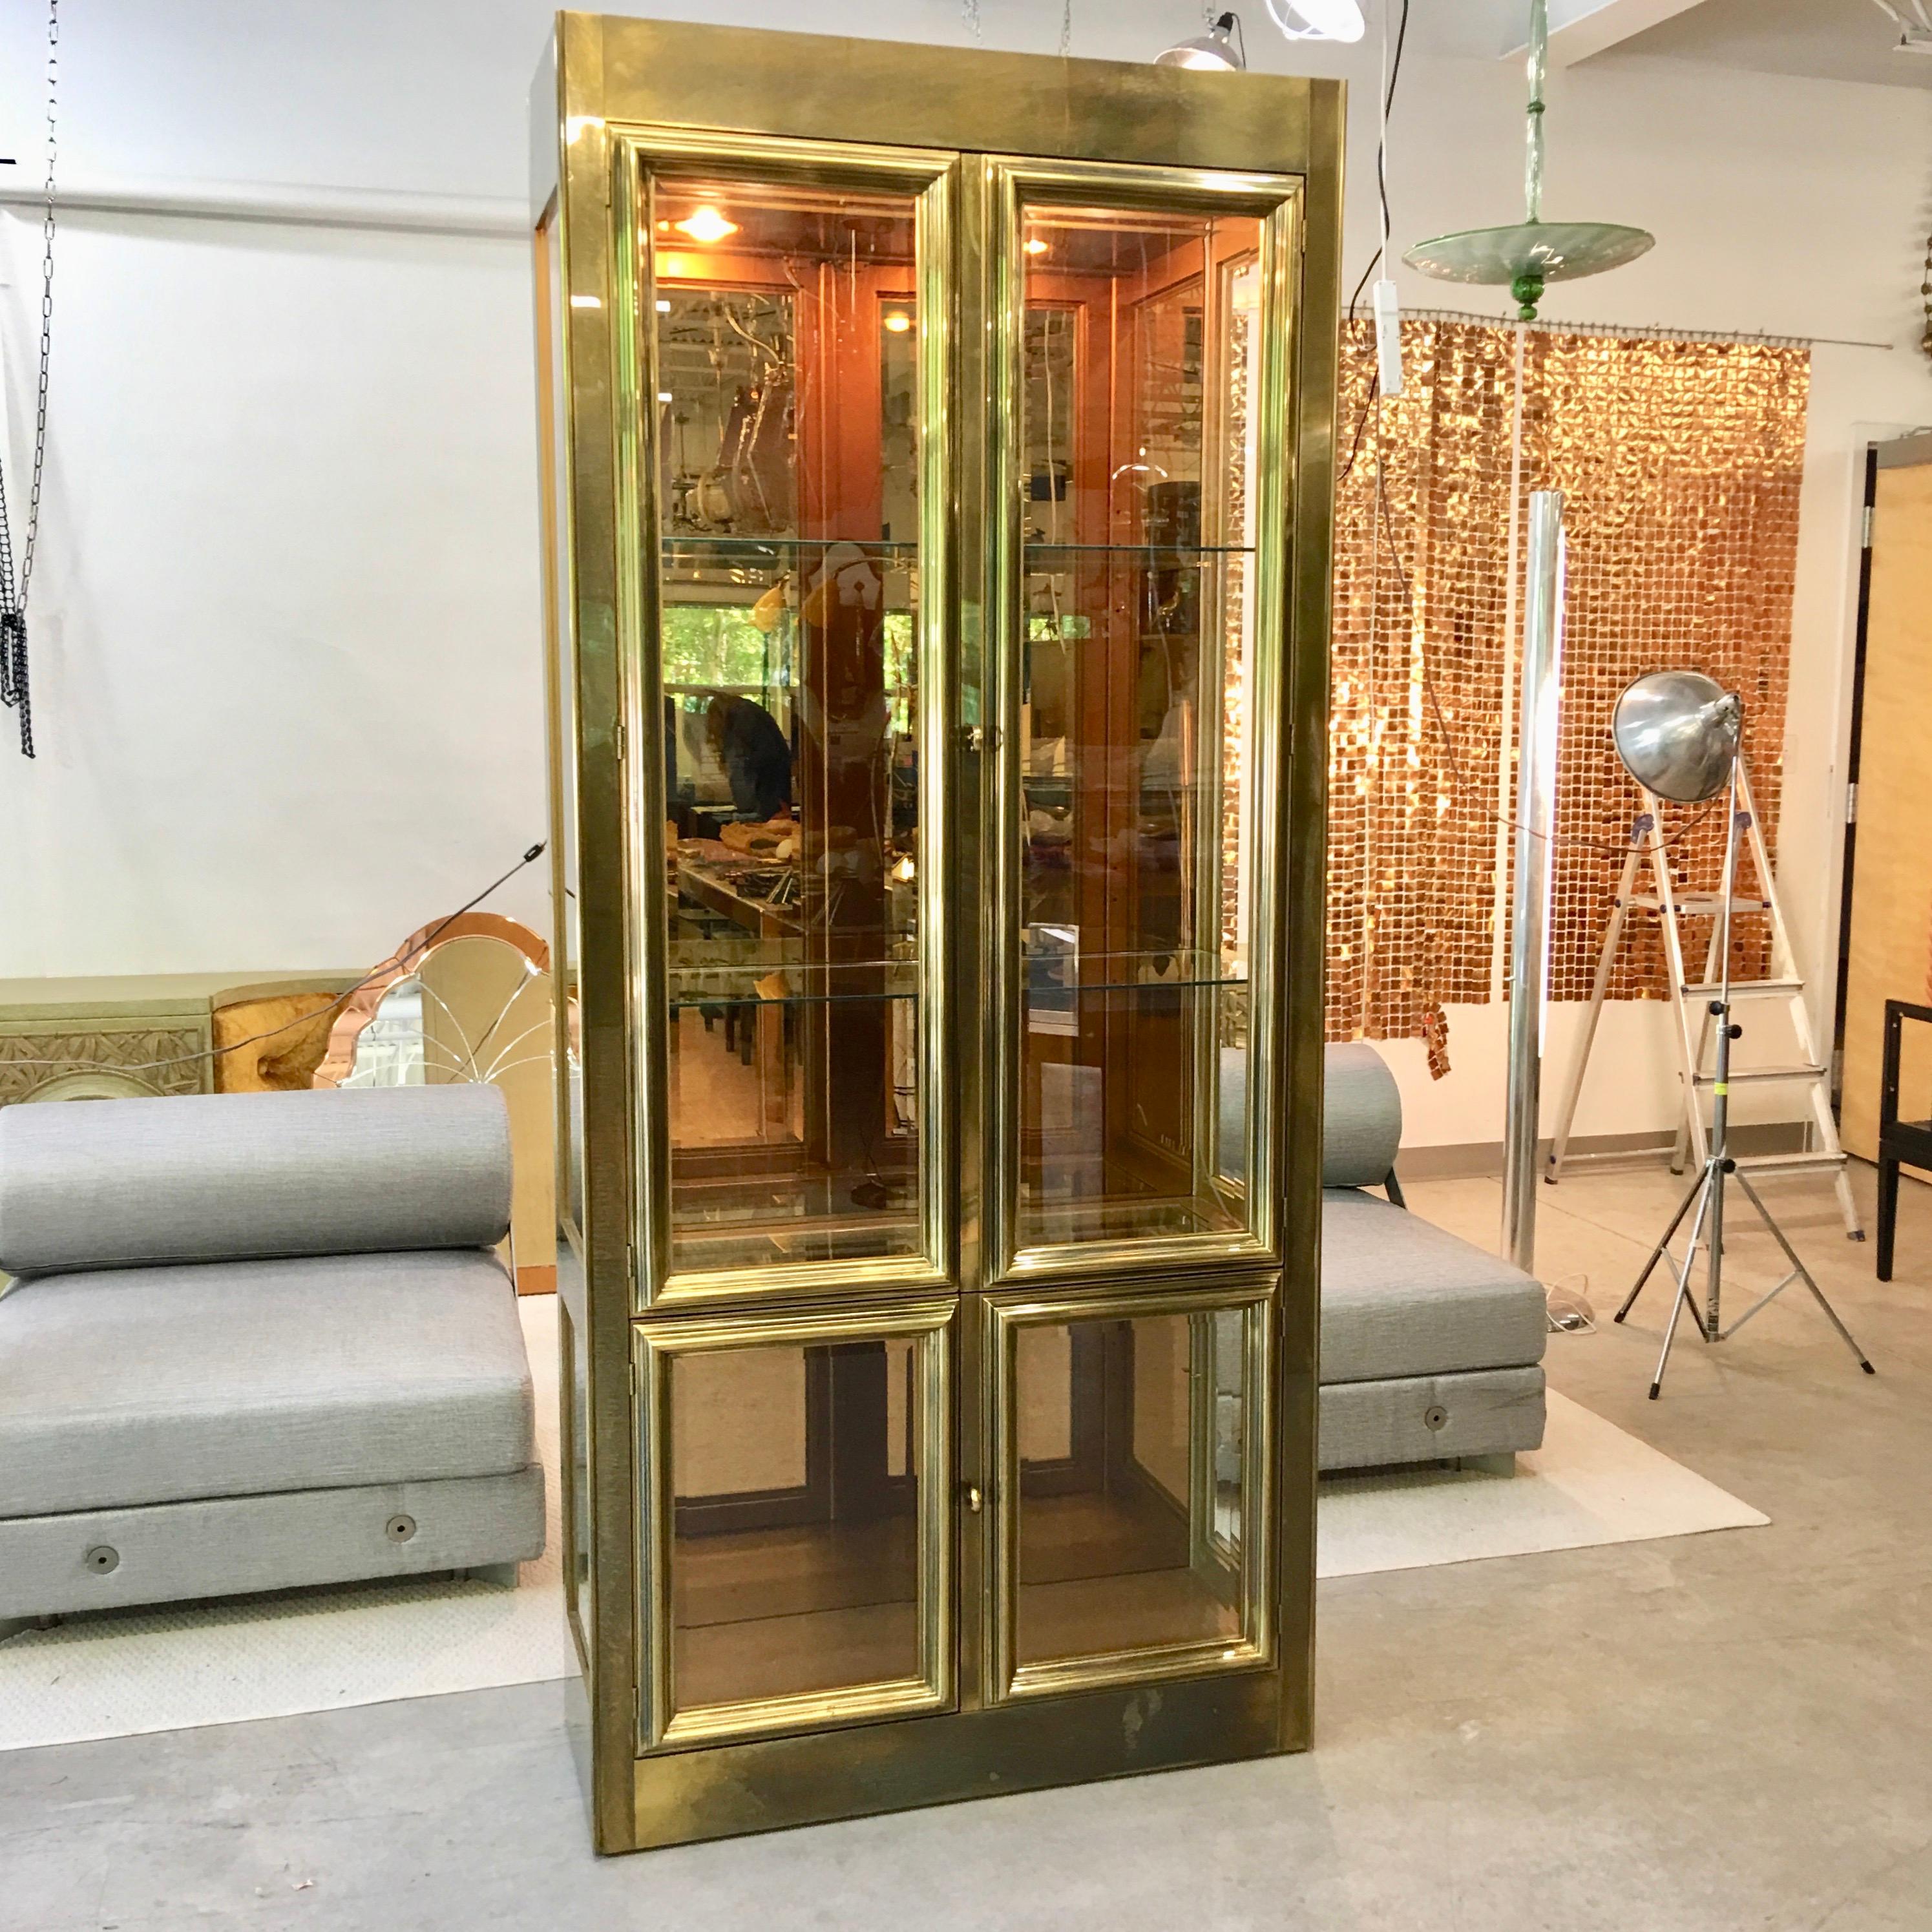 Four door brass vitrine display case by Mastercraft of Grand Rapids, Michigan circa 1970. Upper case with two tall doors; lower case with two short doors; all doors with beveled glass framed in heavy brass moulding. Upper and lower sidelight windows